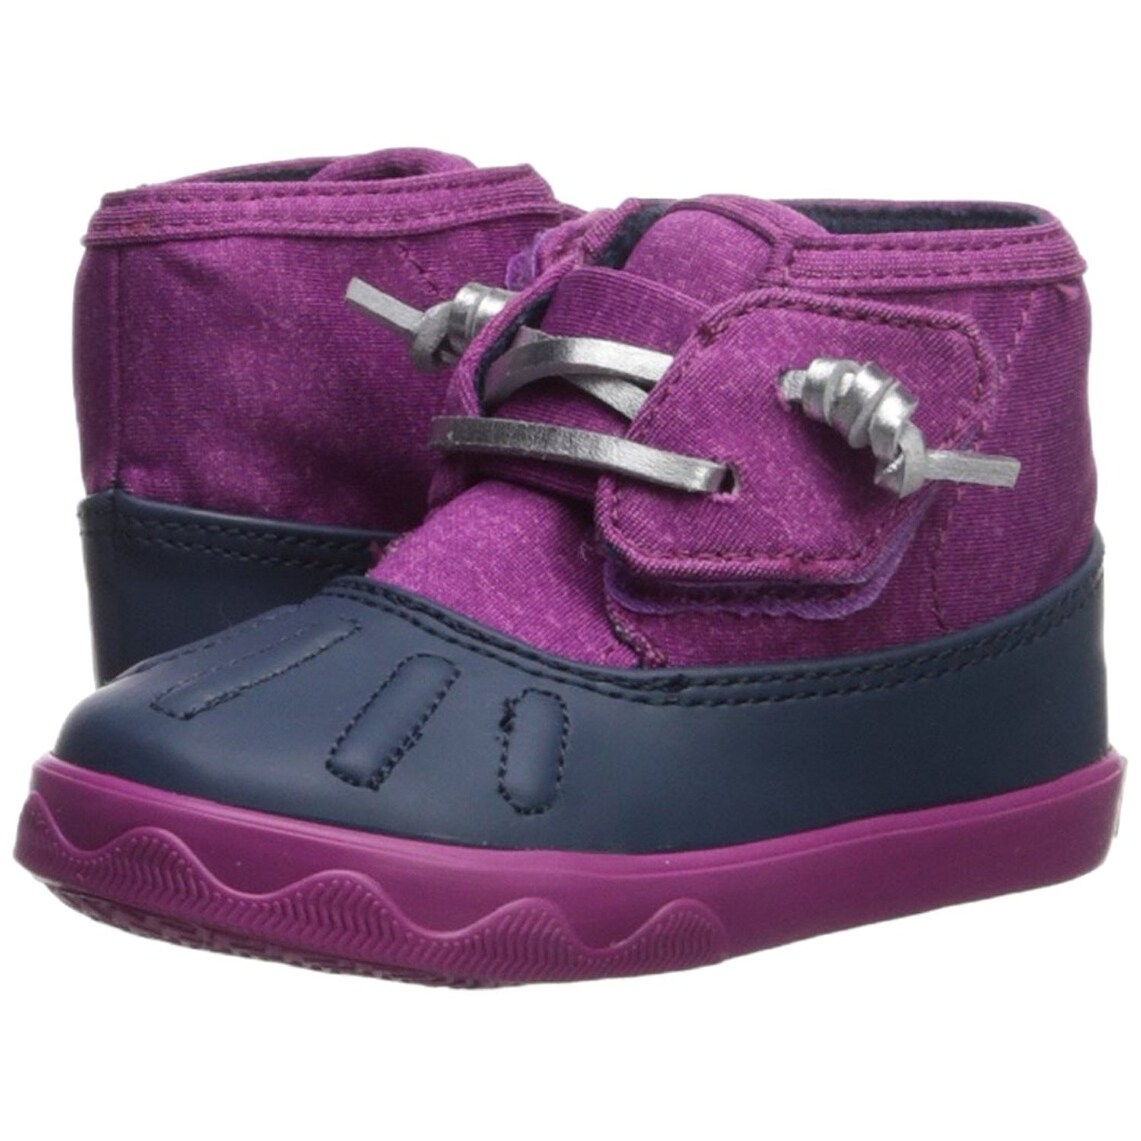 sperry infant boots